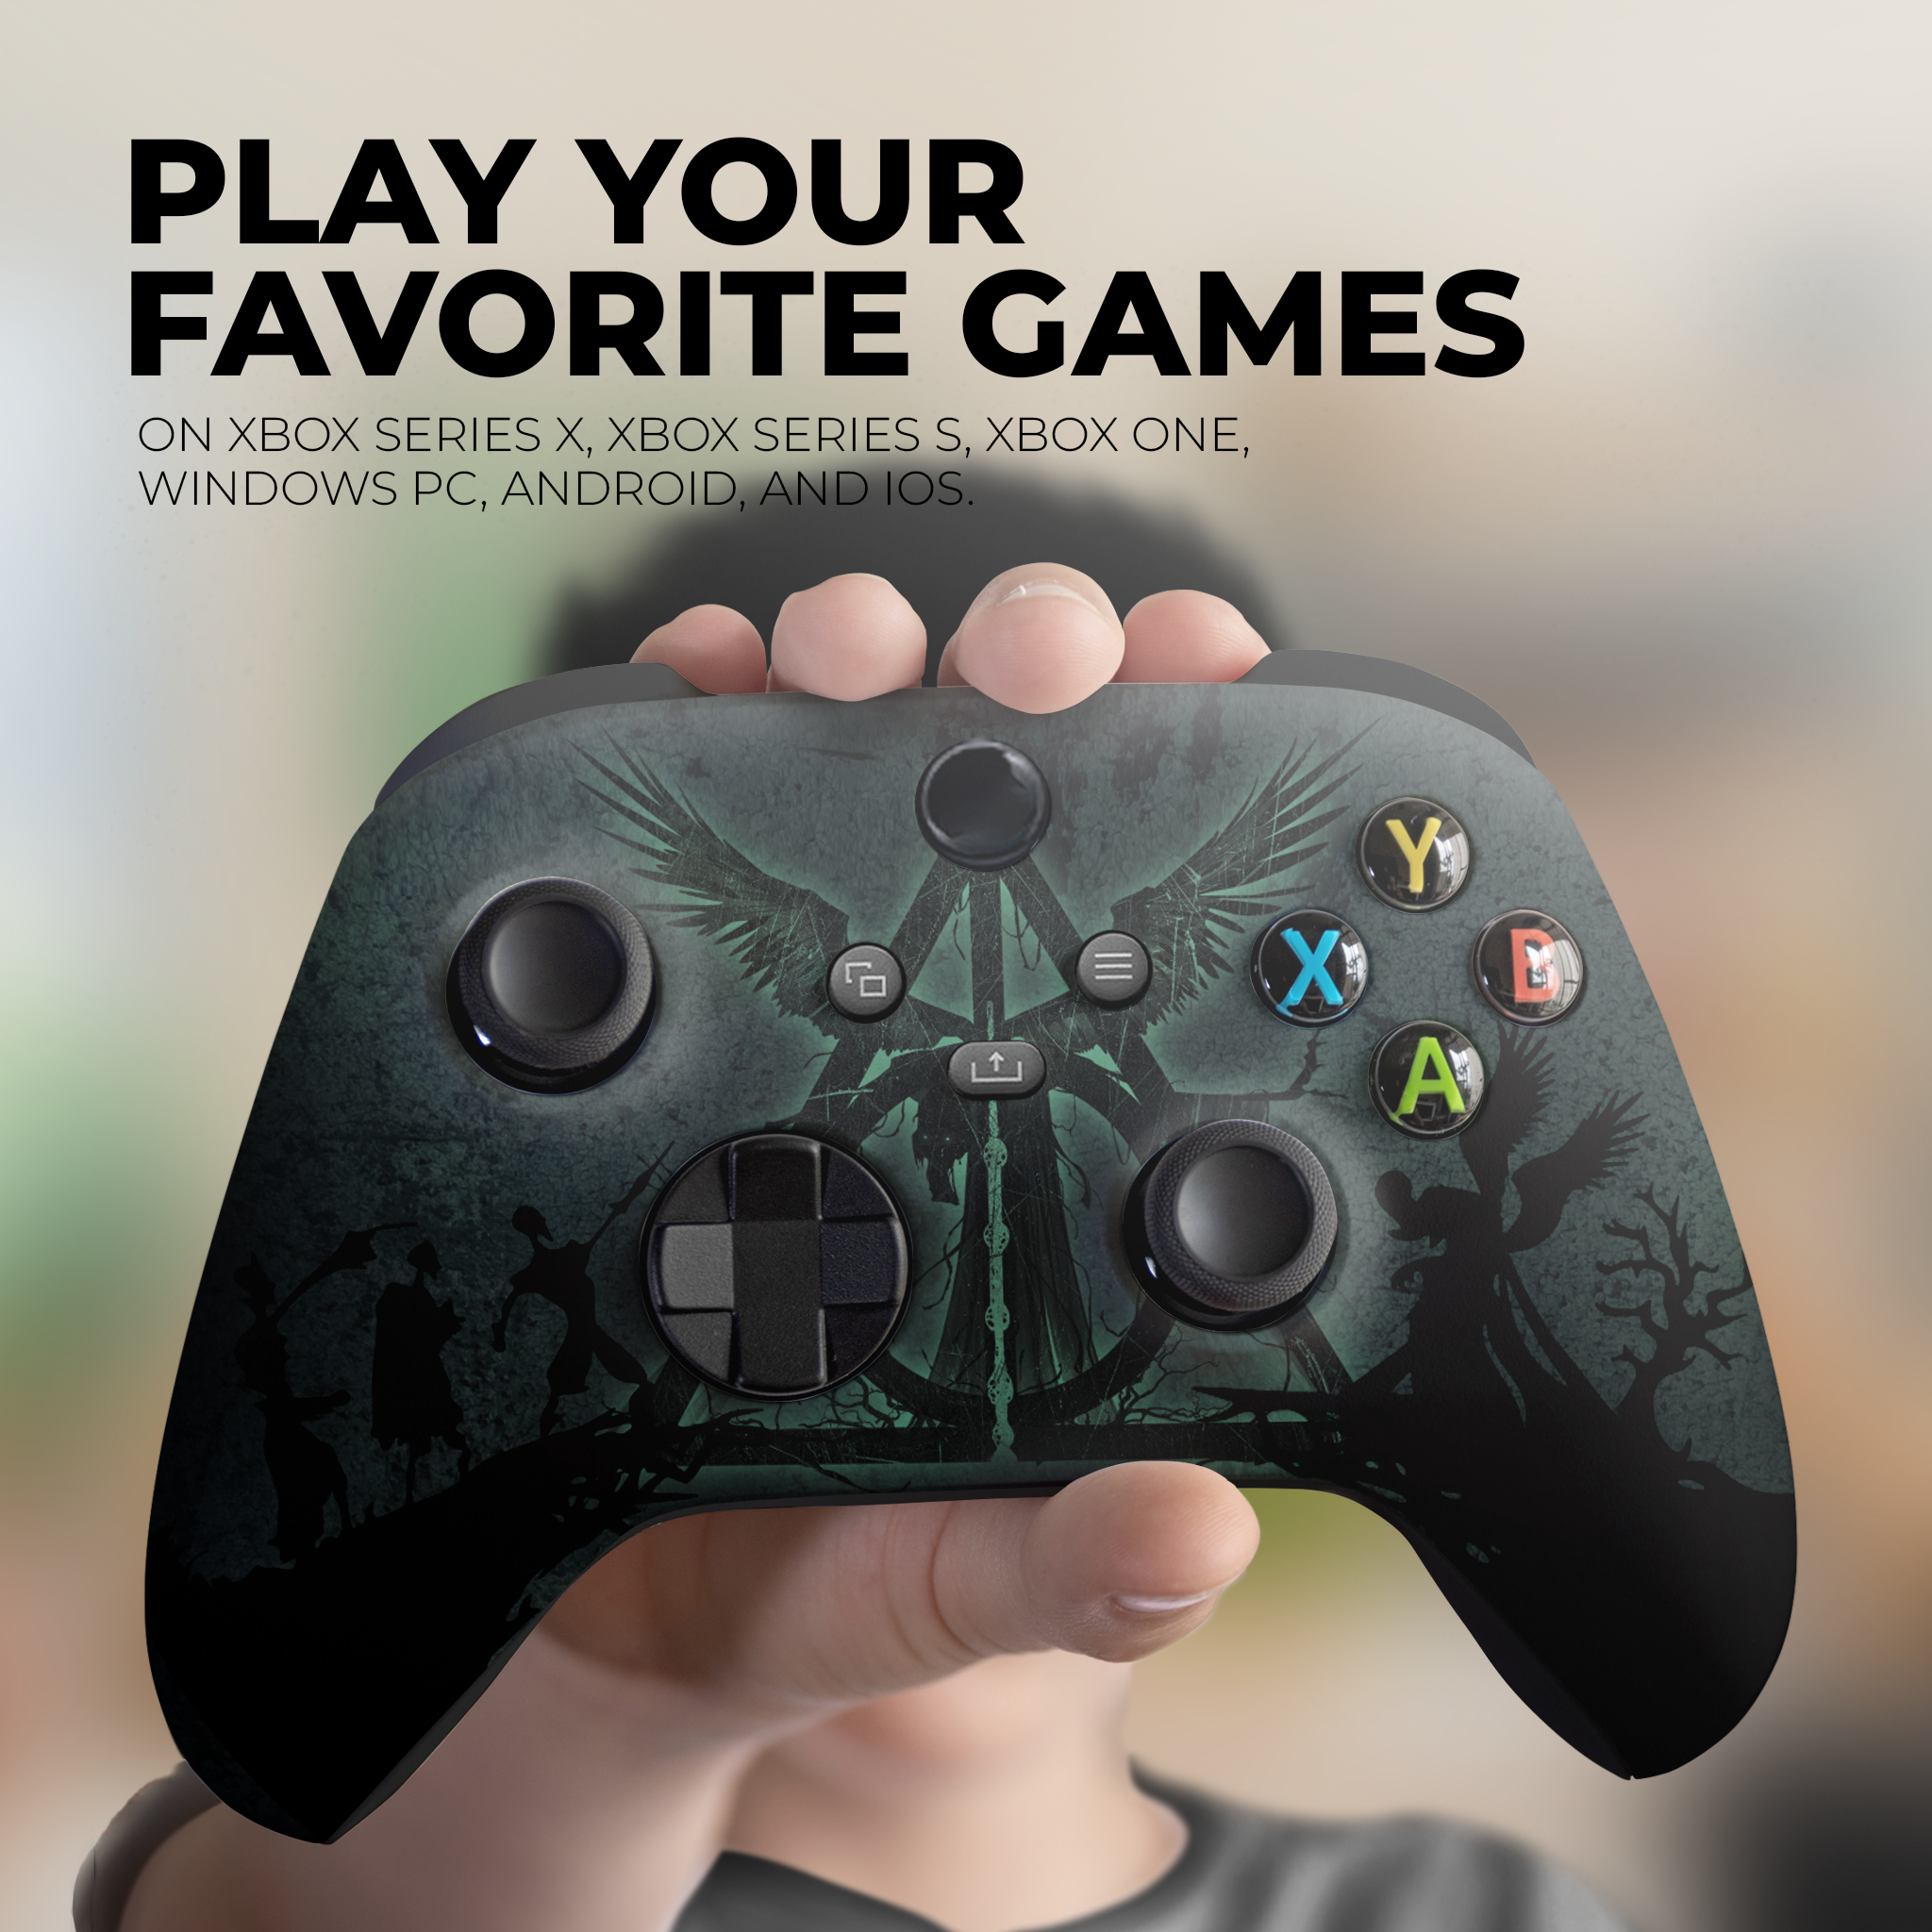 Harry Potter Deathly Hallows Xbox Series X Controller